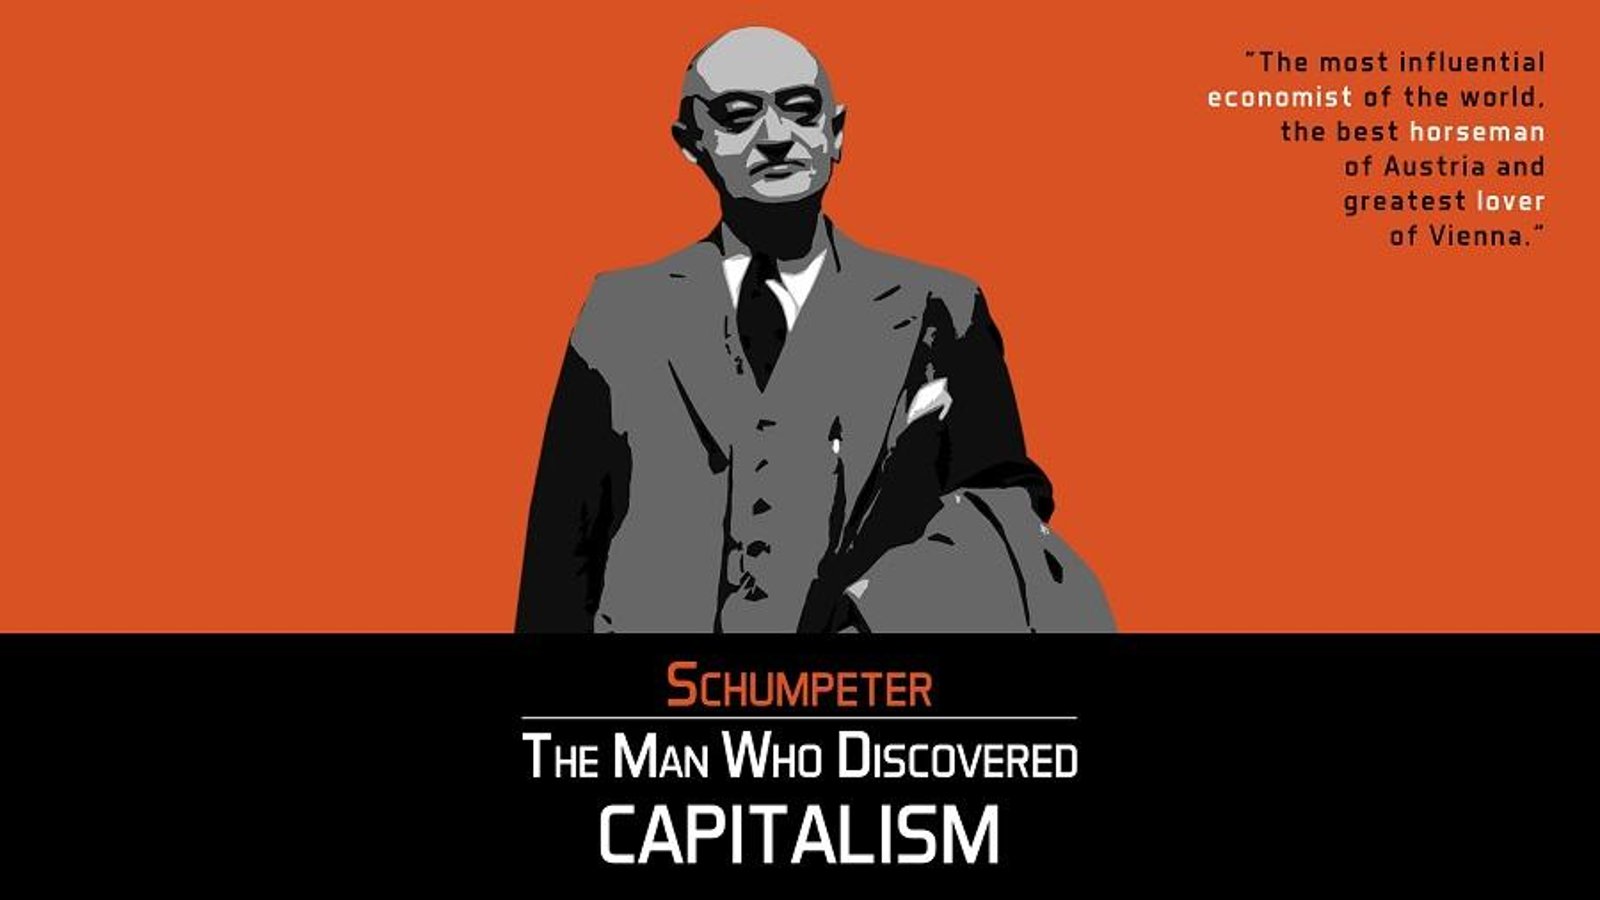 The Man Who Discovered Capitalism - The Life and Ideas of Influential Economist Joseph Schumpeter